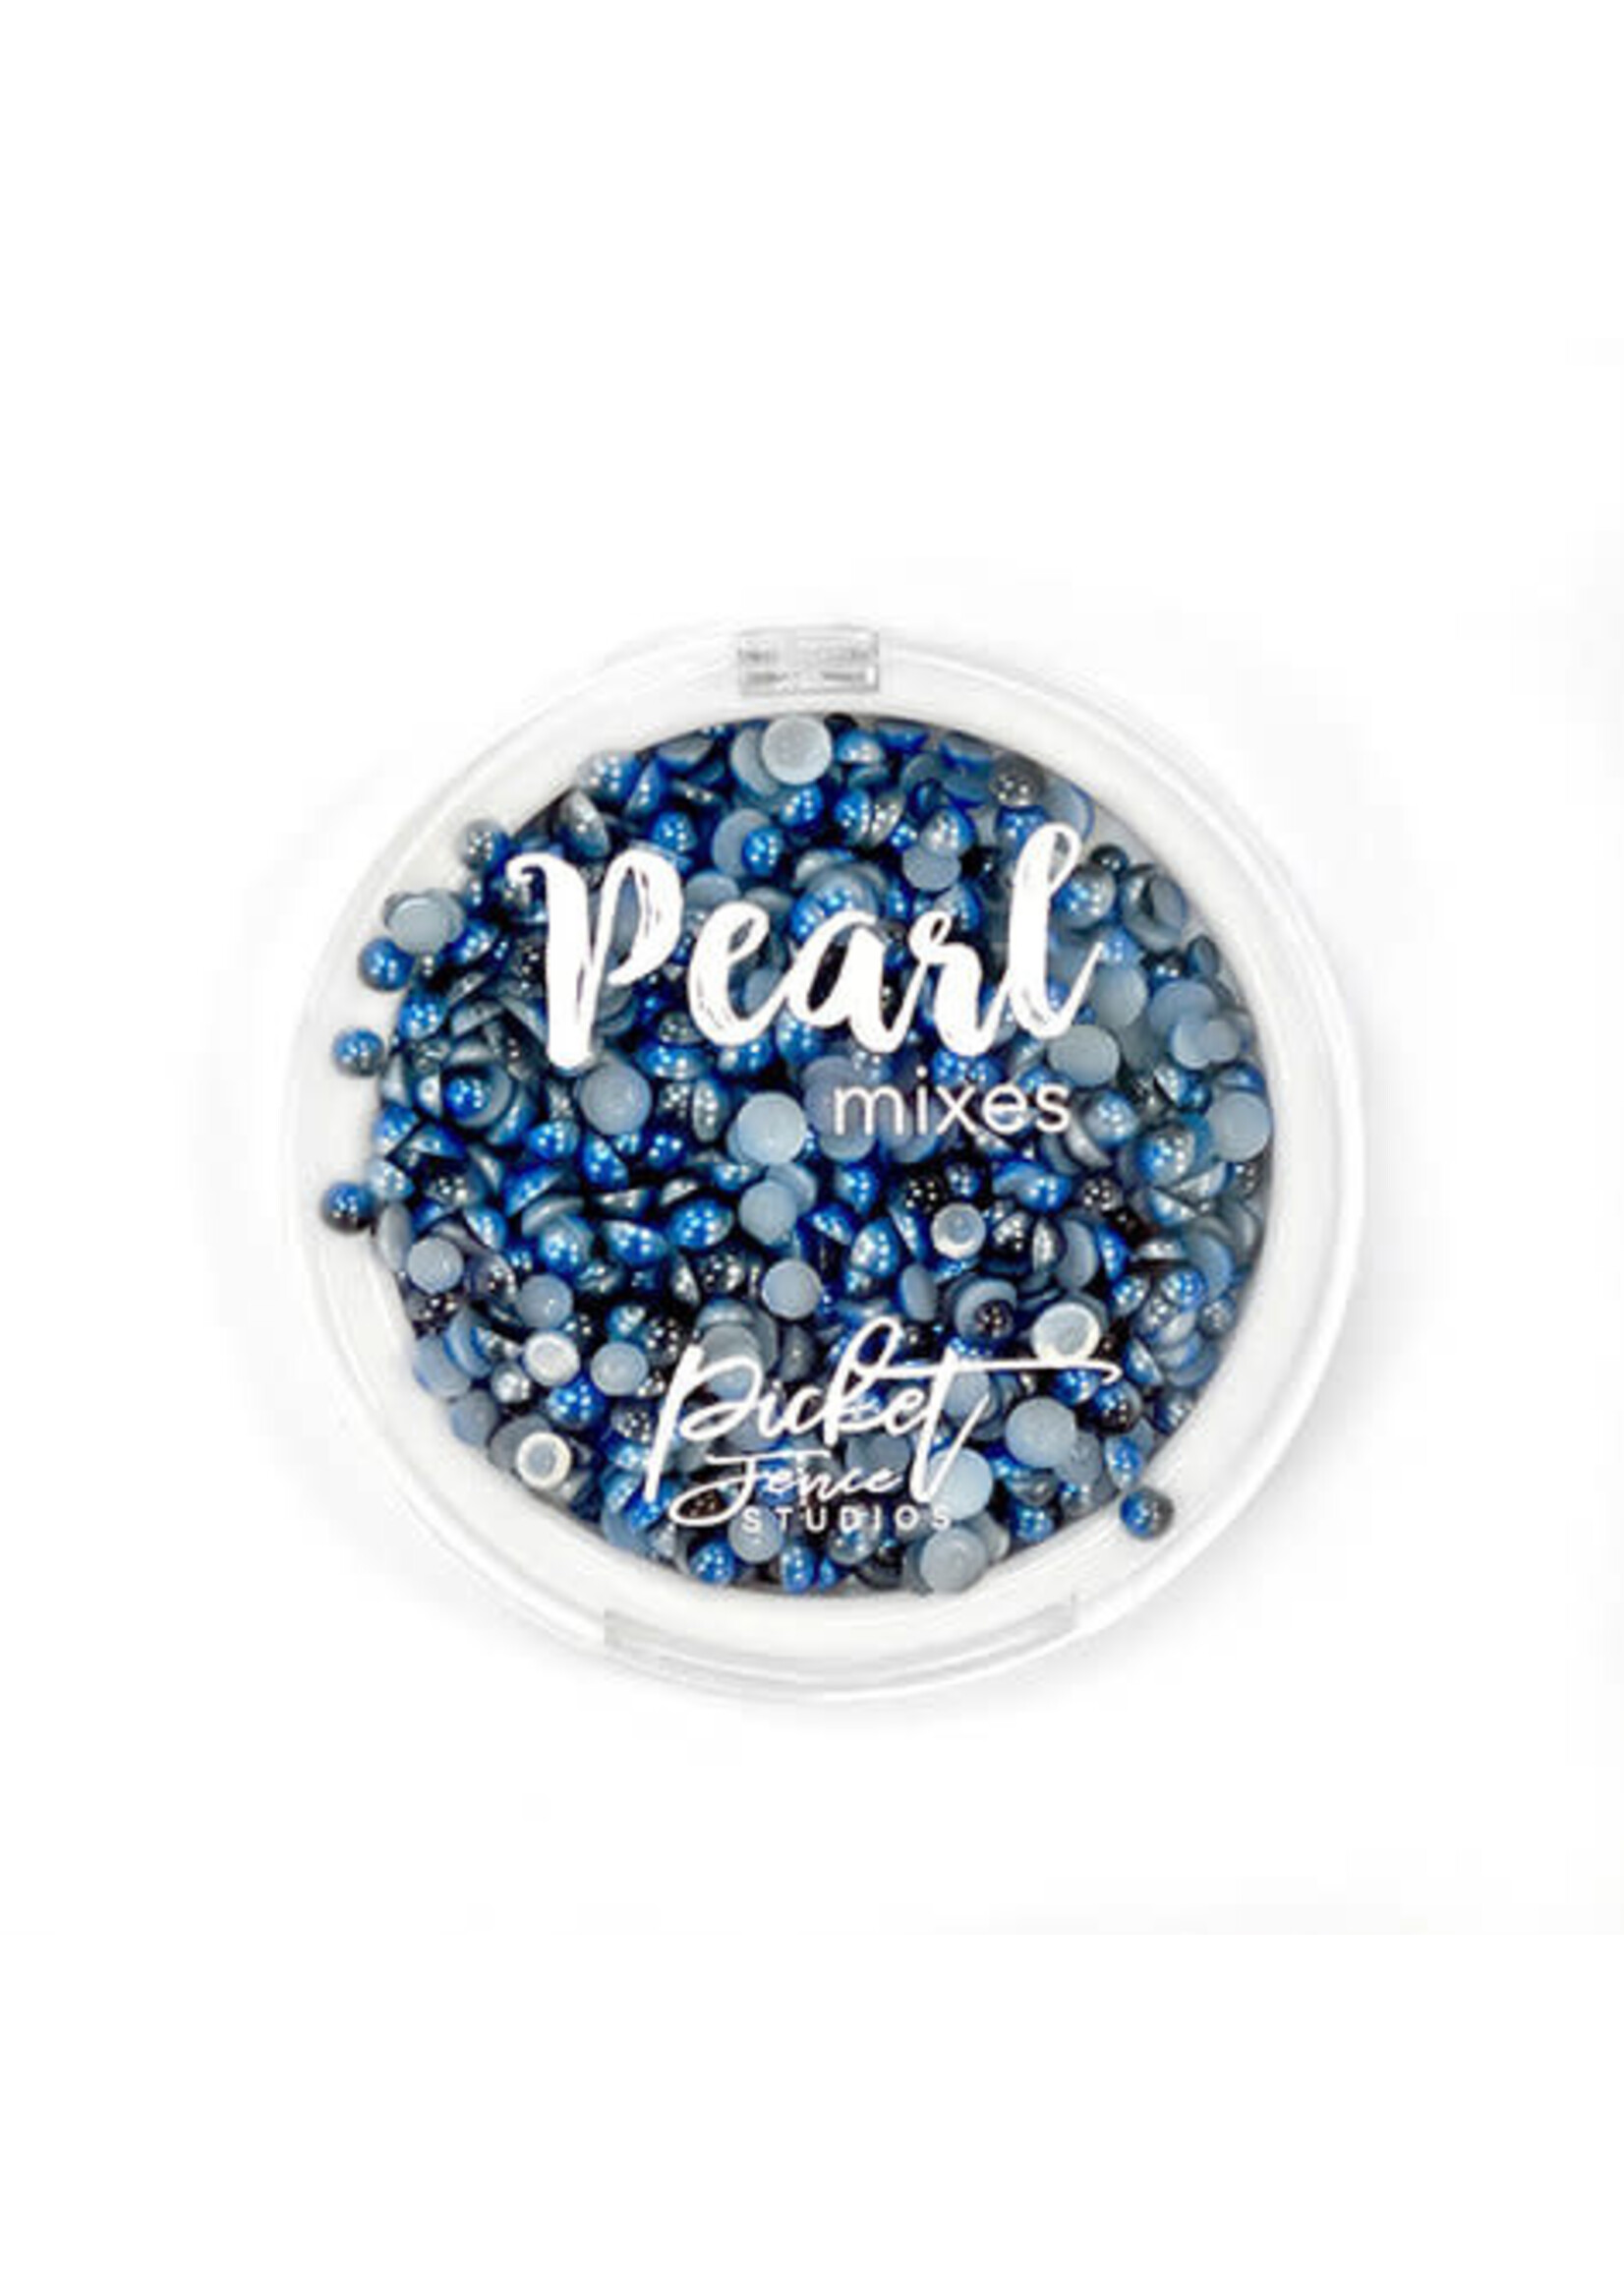 Picket Friends Gradient Flatback Pearls Navy Blue & Charcoal Gray (PM-108)